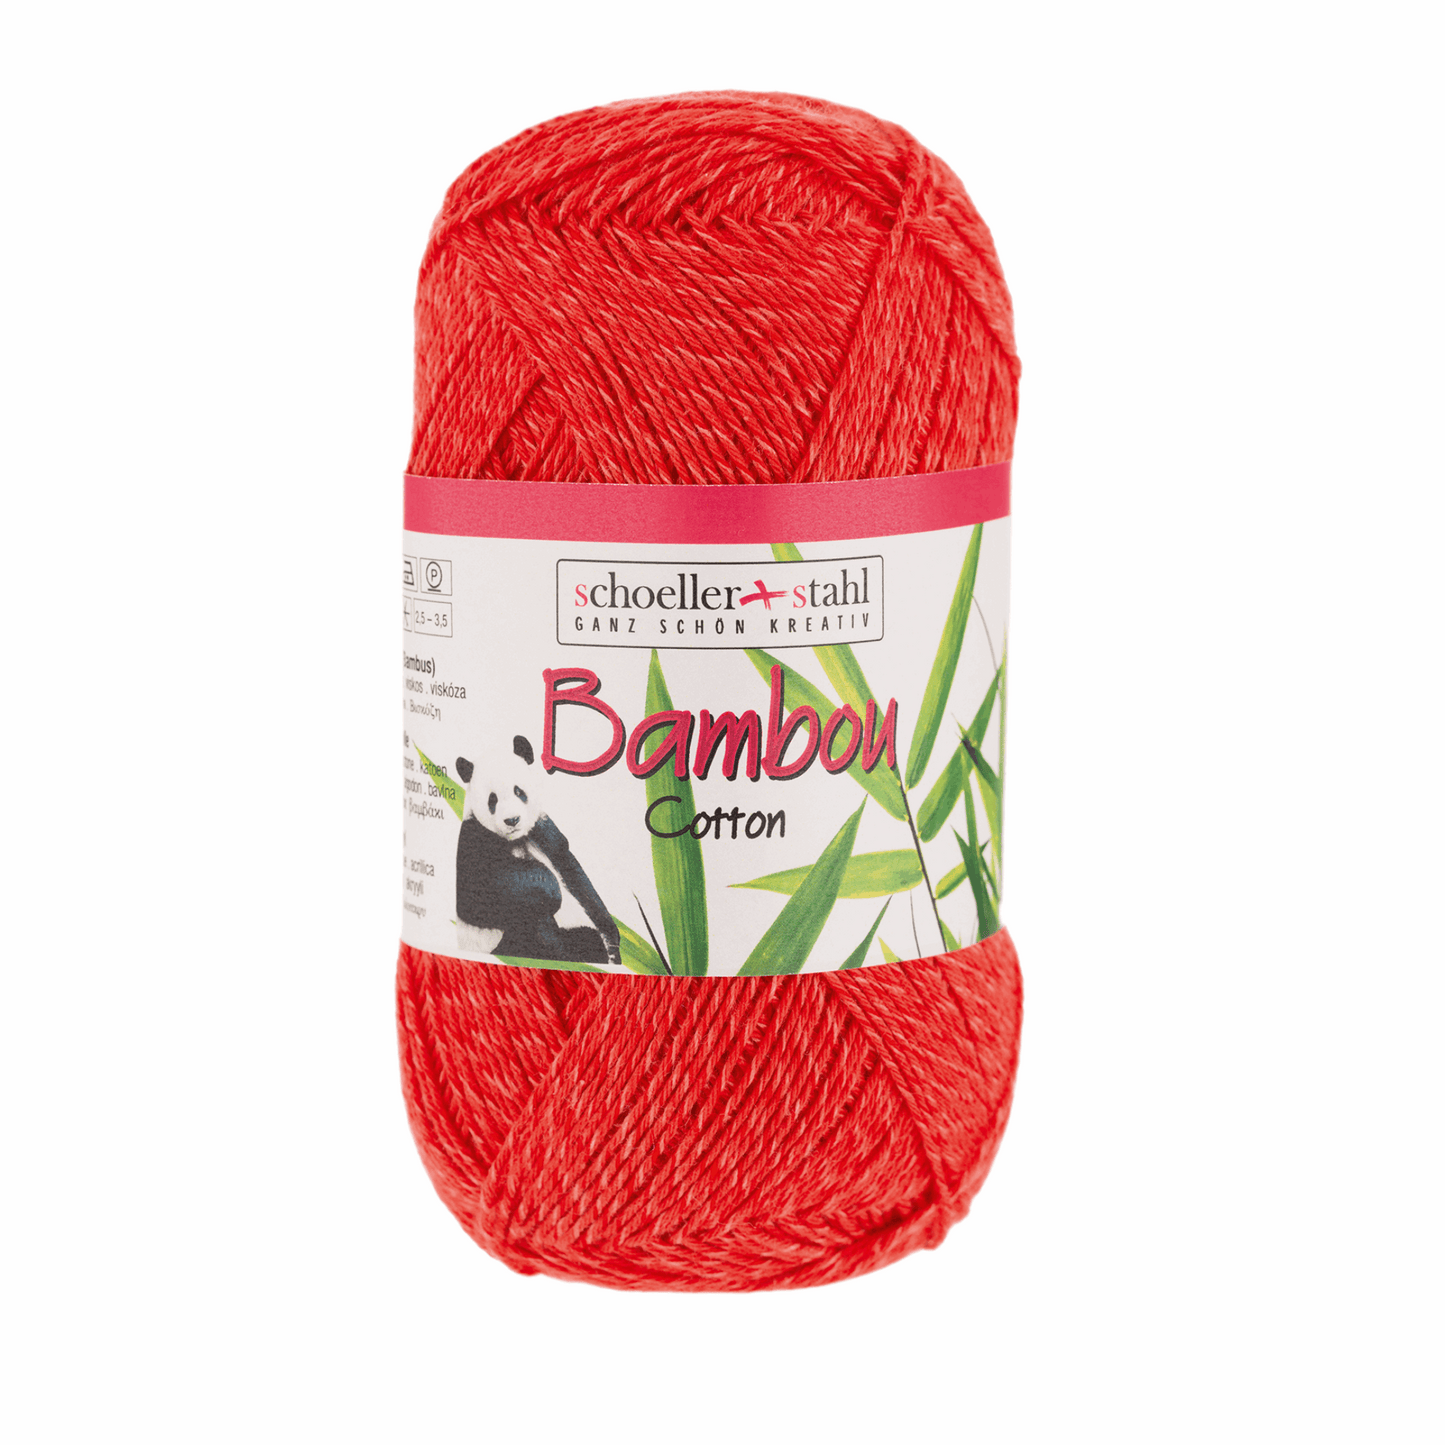 Bambou Cotton 100g, 90286, Farbe 8, rot